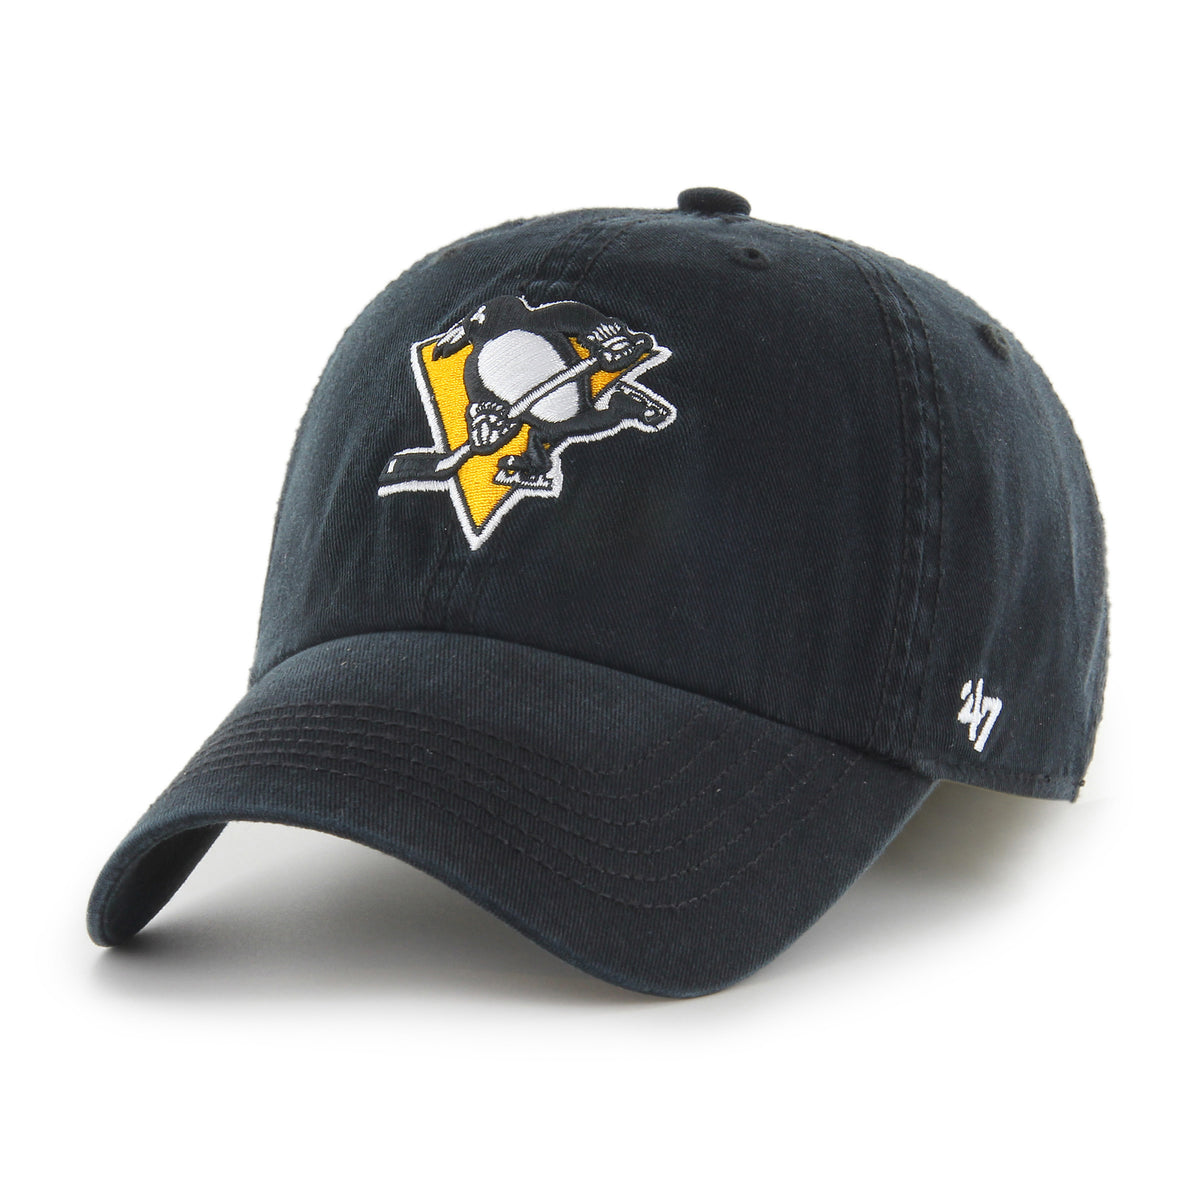 PITTSBURGH PENGUINS CLASSIC '47 FRANCHISE